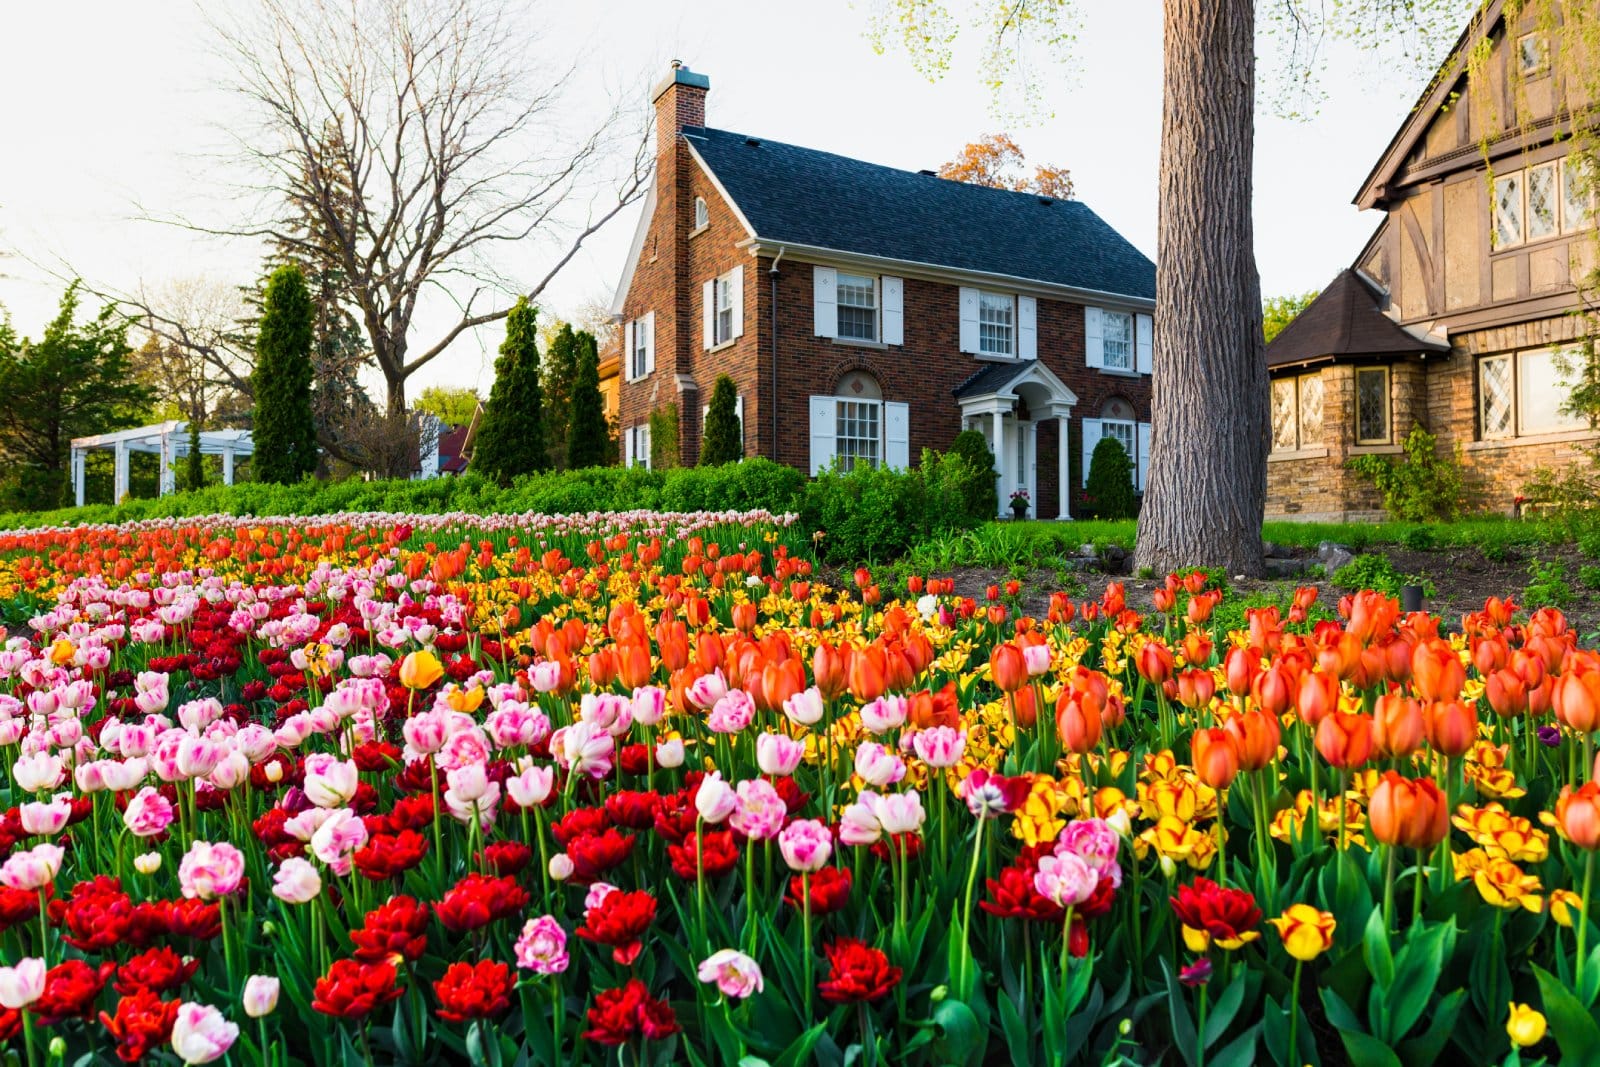 <p class="wp-caption-text">Image Credit: Shutterstock / Facto Photo</p>  <p><span>Celebrated in Ottawa, the Canadian Tulip Festival is the largest of its kind in North America, born from the historic gift of tulips from the Dutch royal family. The festival showcases over a million tulips across the city, with major displays at Commissioners Park.</span></p> <p><b>Insider’s Tip: </b><span>Don’t miss the evening light shows for a different perspective on the floral displays.</span></p> <p><b>When to Travel: </b><span>May</span></p> <p><b>How to Get There: </b><span>Ottawa is accessible by air, and the festival venues are easily reached by public transportation or car.</span></p>